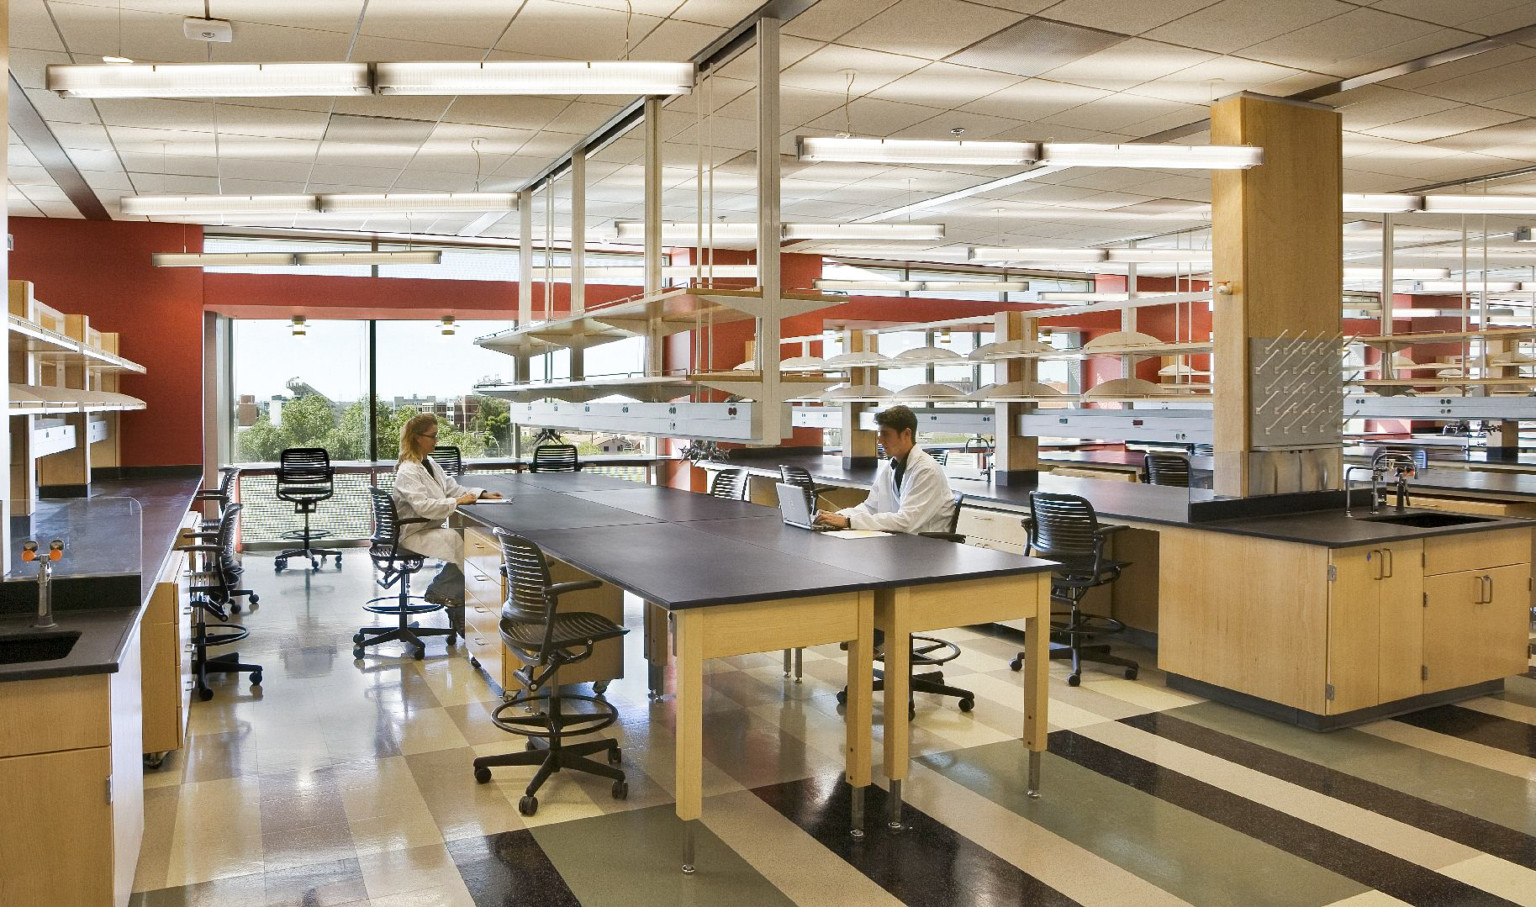 2 people in lab coats at table in laboratory, large windows on back wall, red accent wall, shelves hang over rows of tables